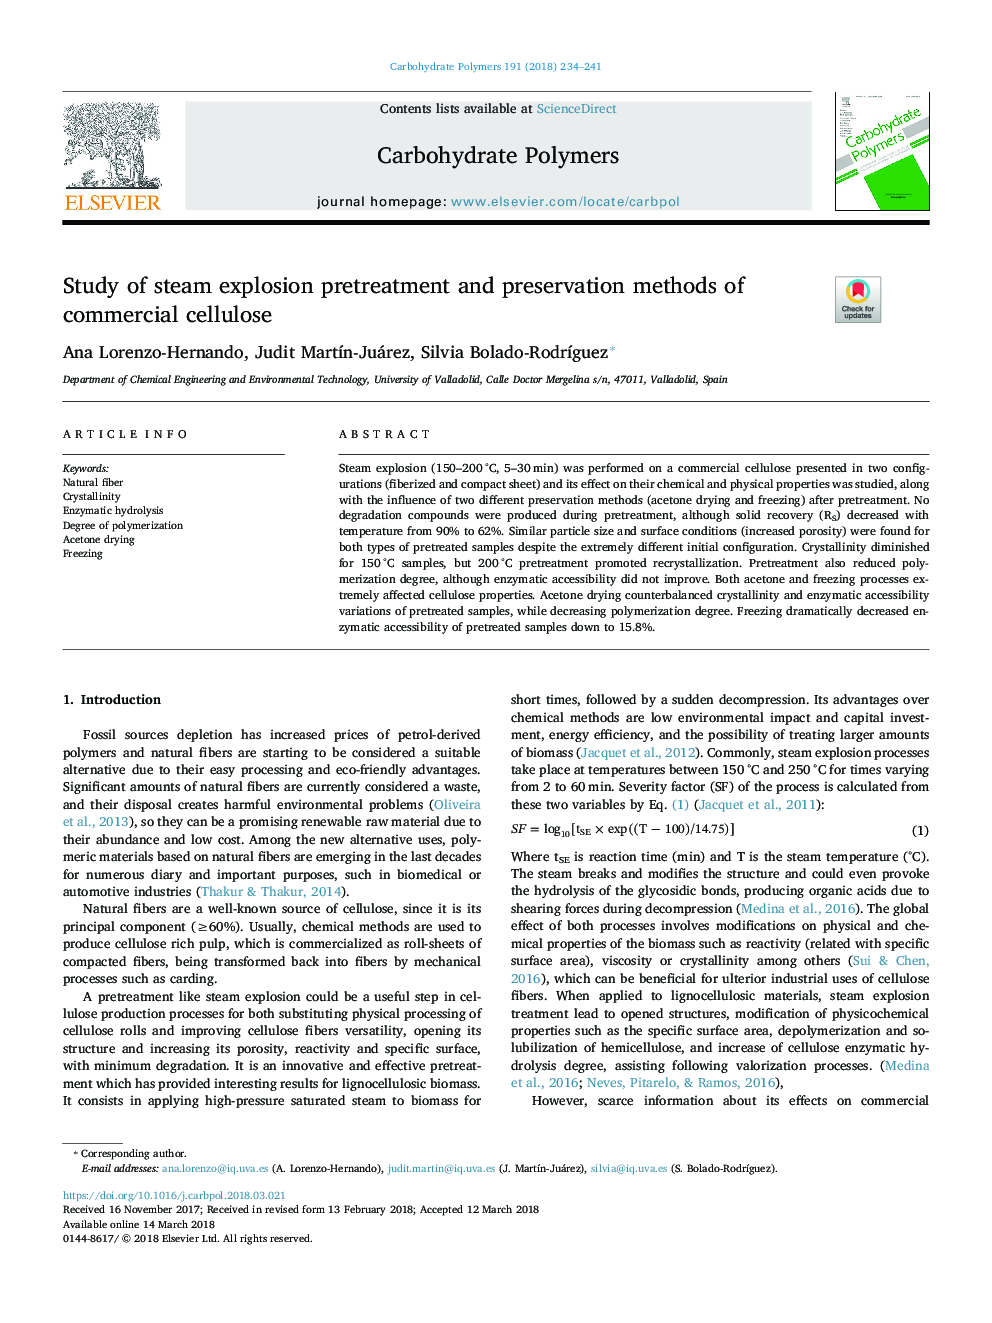 Study of steam explosion pretreatment and preservation methods of commercial cellulose